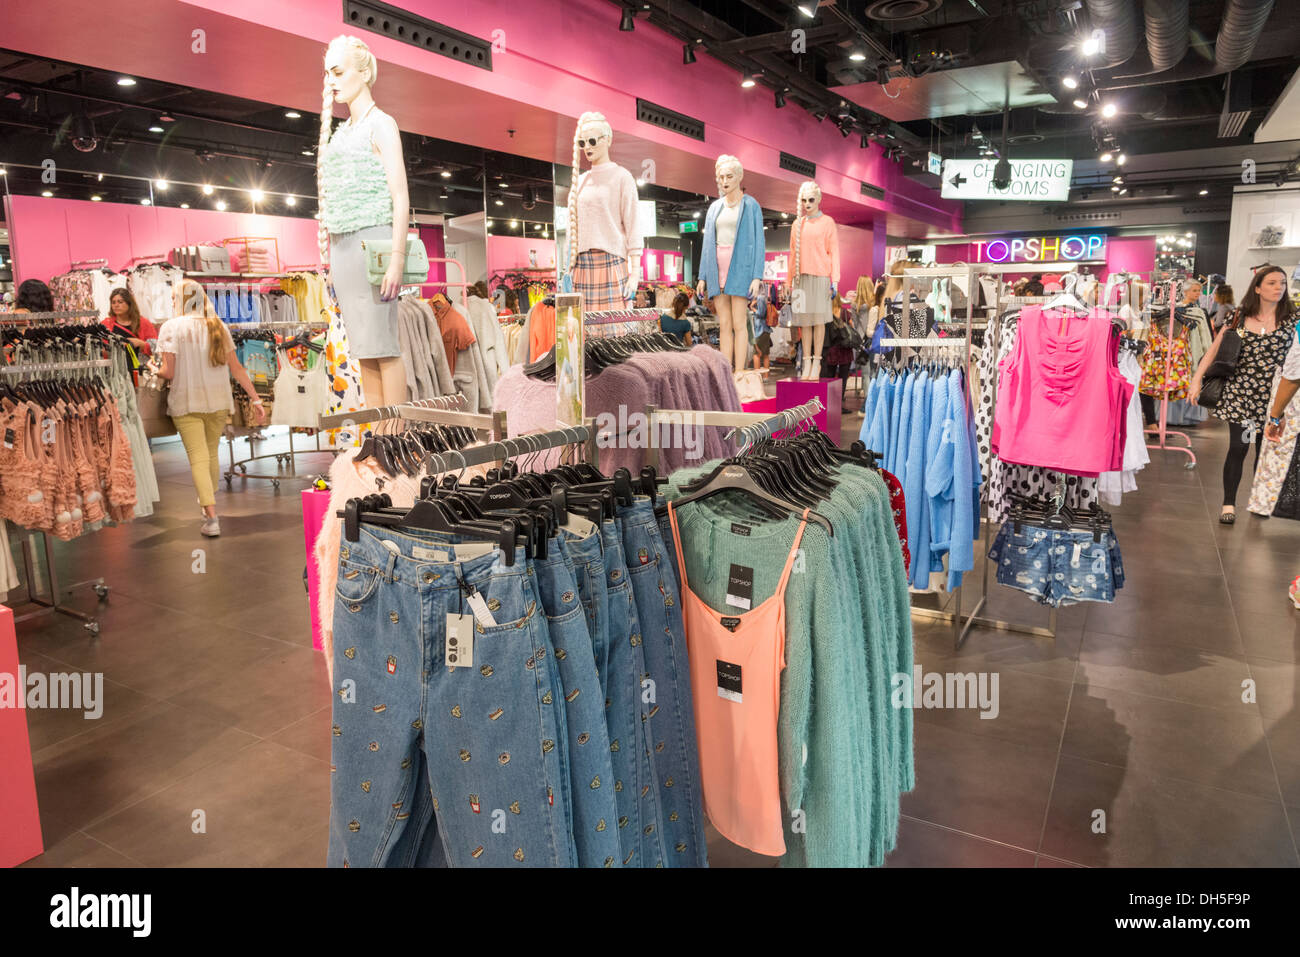 Women's clothes in Topshop, Oxford Street, London, England, UK Stock Photo  - Alamy